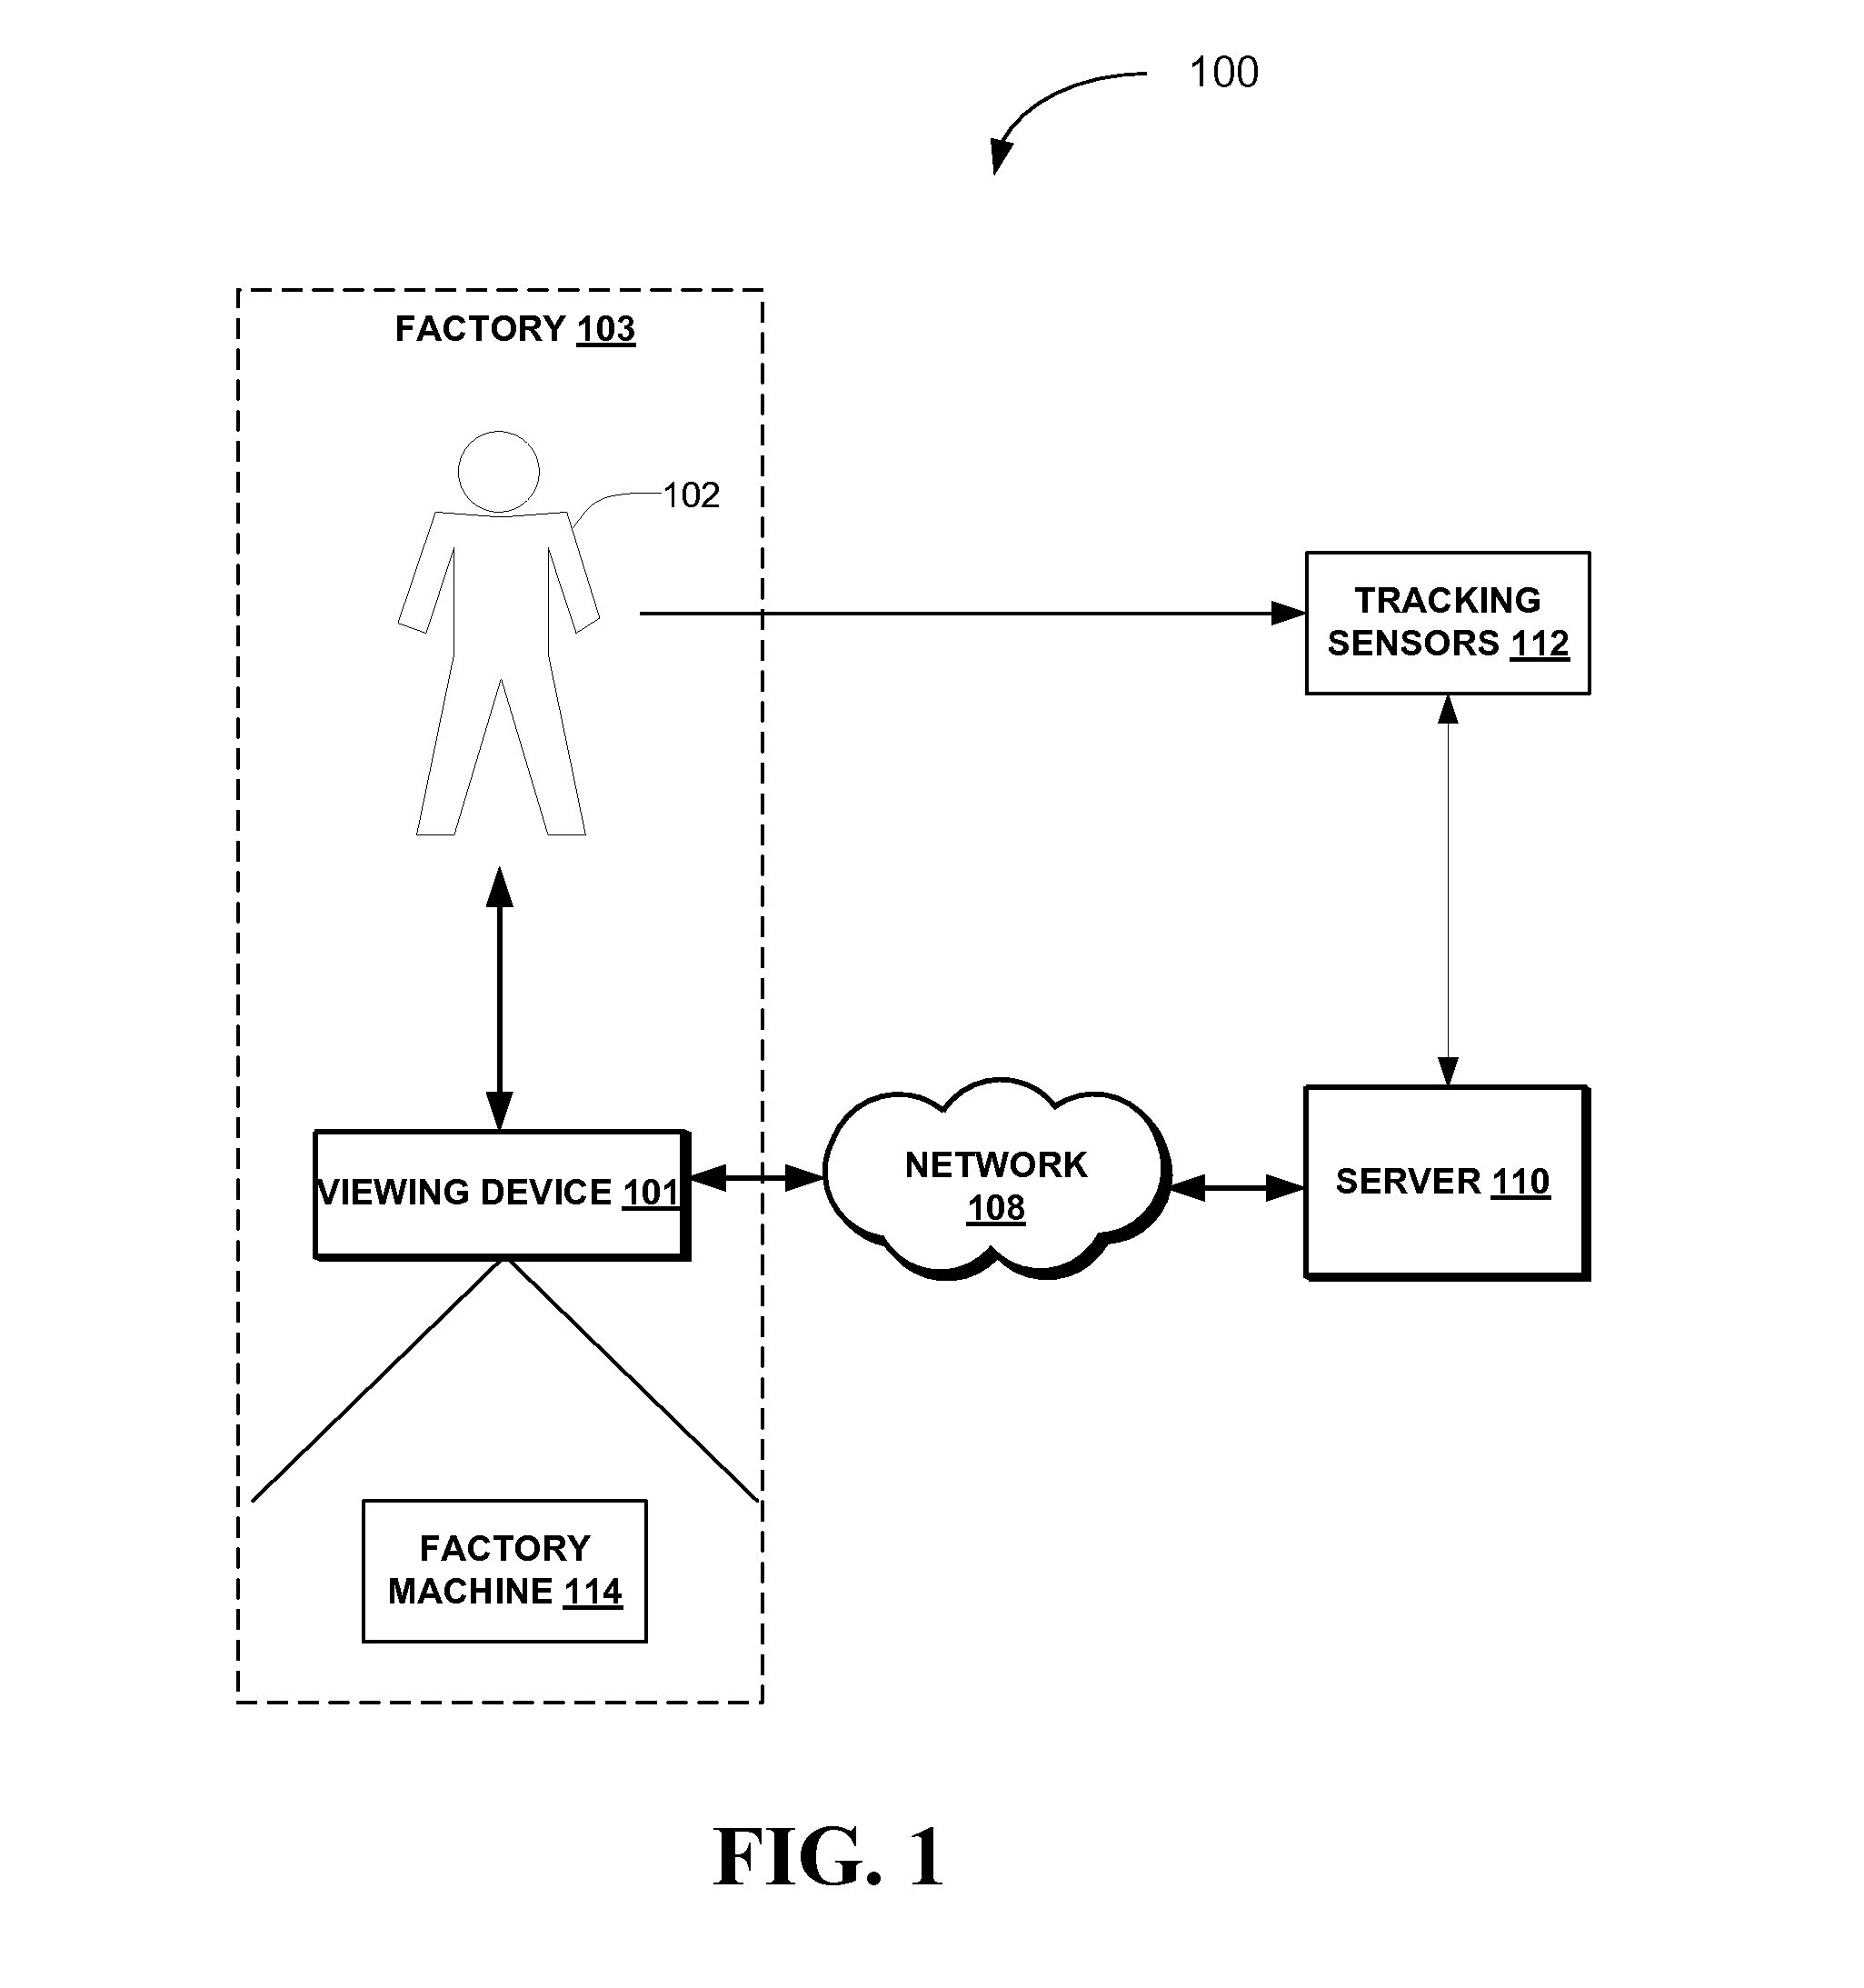 Assigning a virtual user interface to a physical object